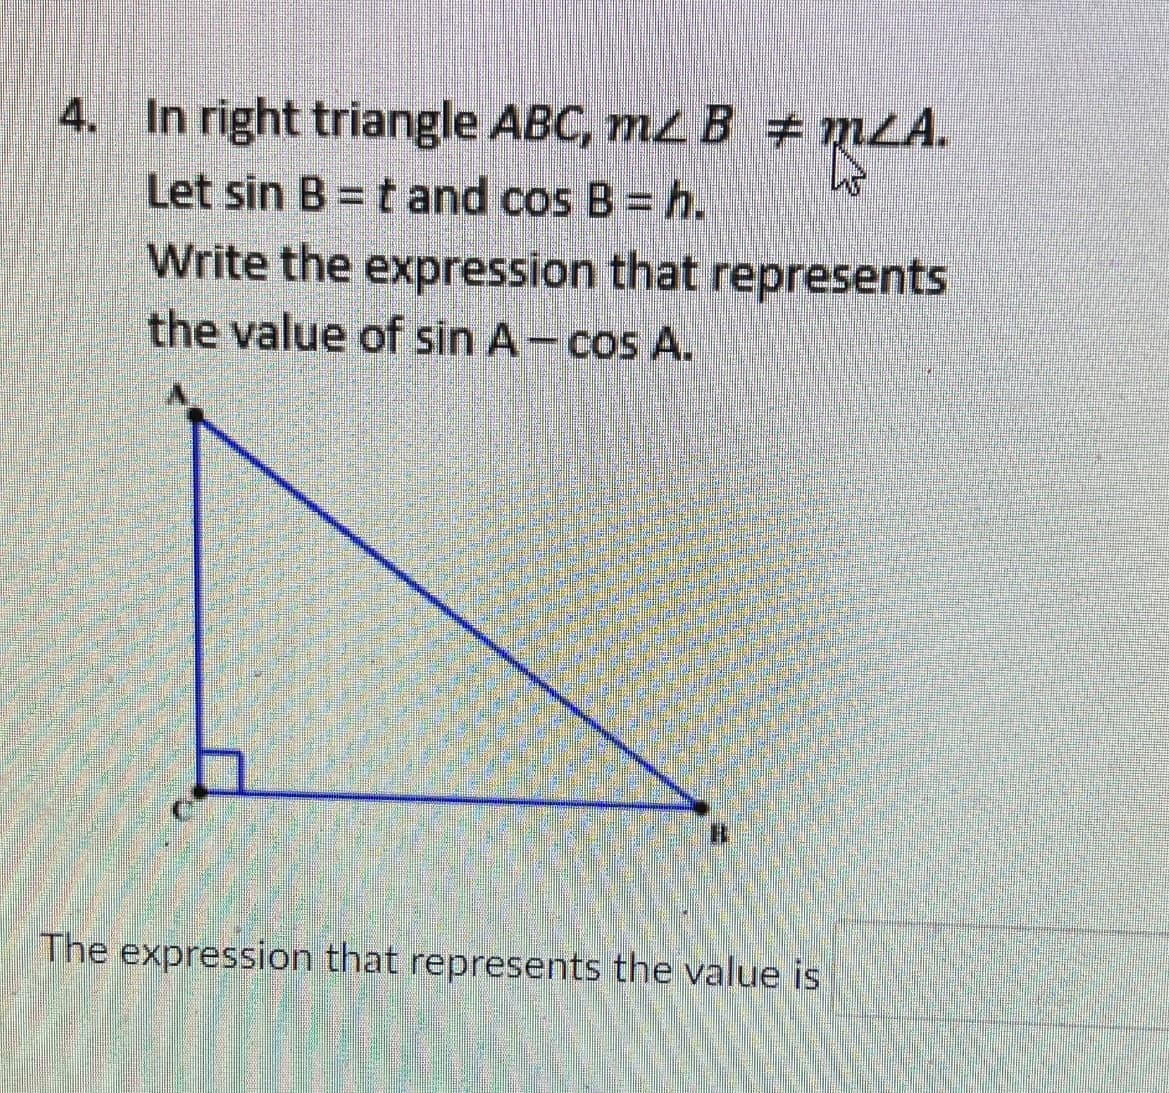 4. In right triangle ABC, mz B # mLA.
Let sin B = t and cos B = h.
Write the expression that represents
the value of sin A- cos A.
The expression that represents the value is
